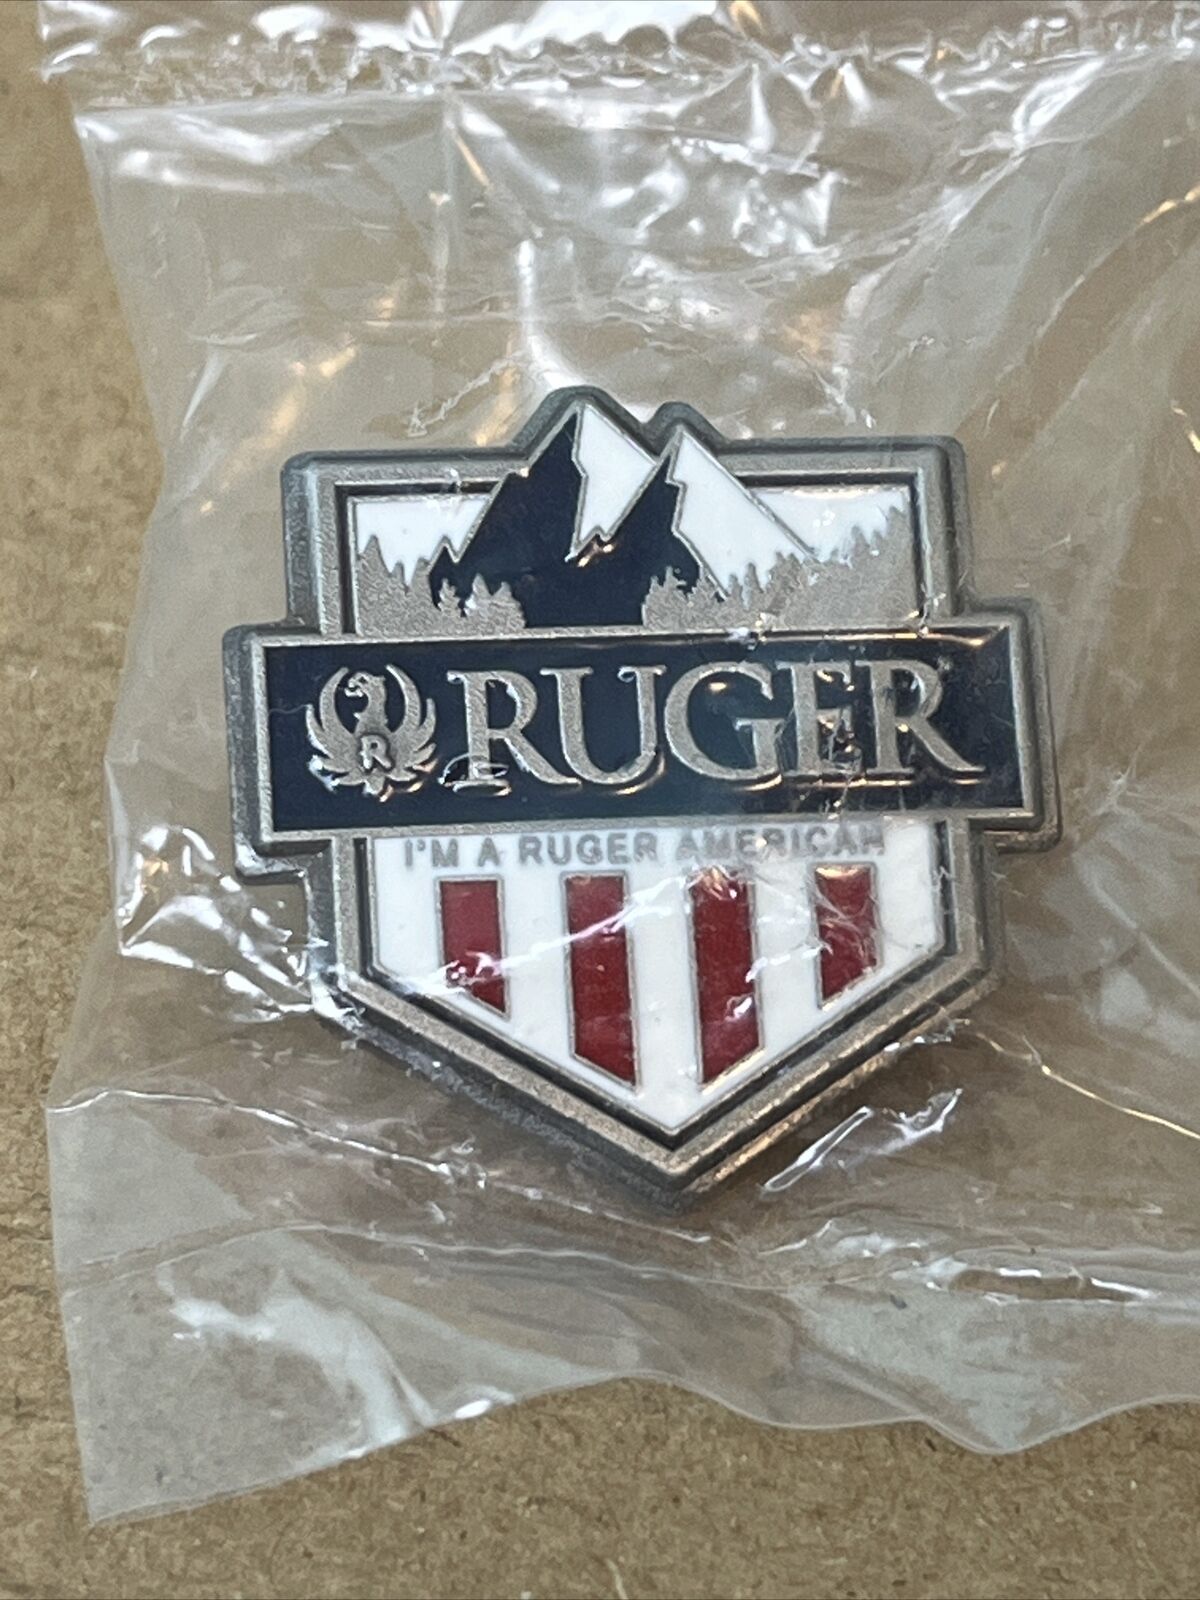 Ruger Firearms I Am A Ruger American  -  Hat or Lapel Enamel Pin